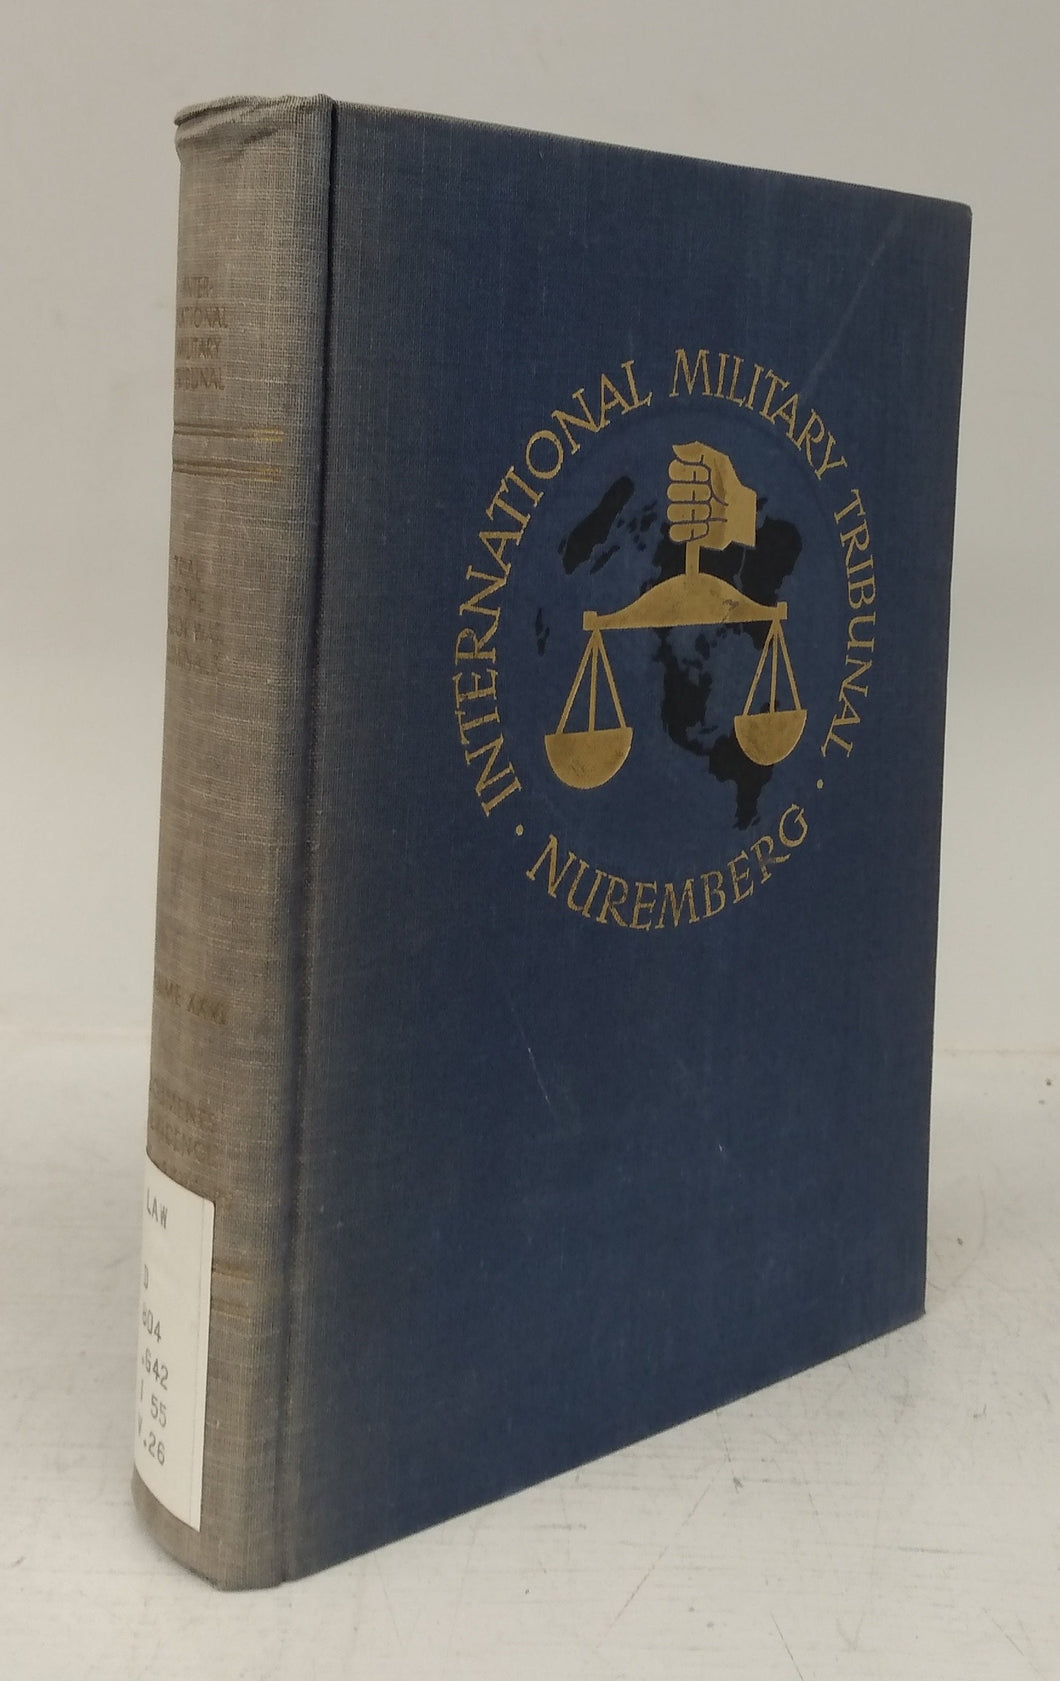 Trial of the Major War Criminals before the International Military Tribunal, Nuremberg, 14 November 1945 - 1 October 1946 (Volume XXVI - Documents and Other Material in Evidence Nos 405-PS to 1063 (d) - PS)